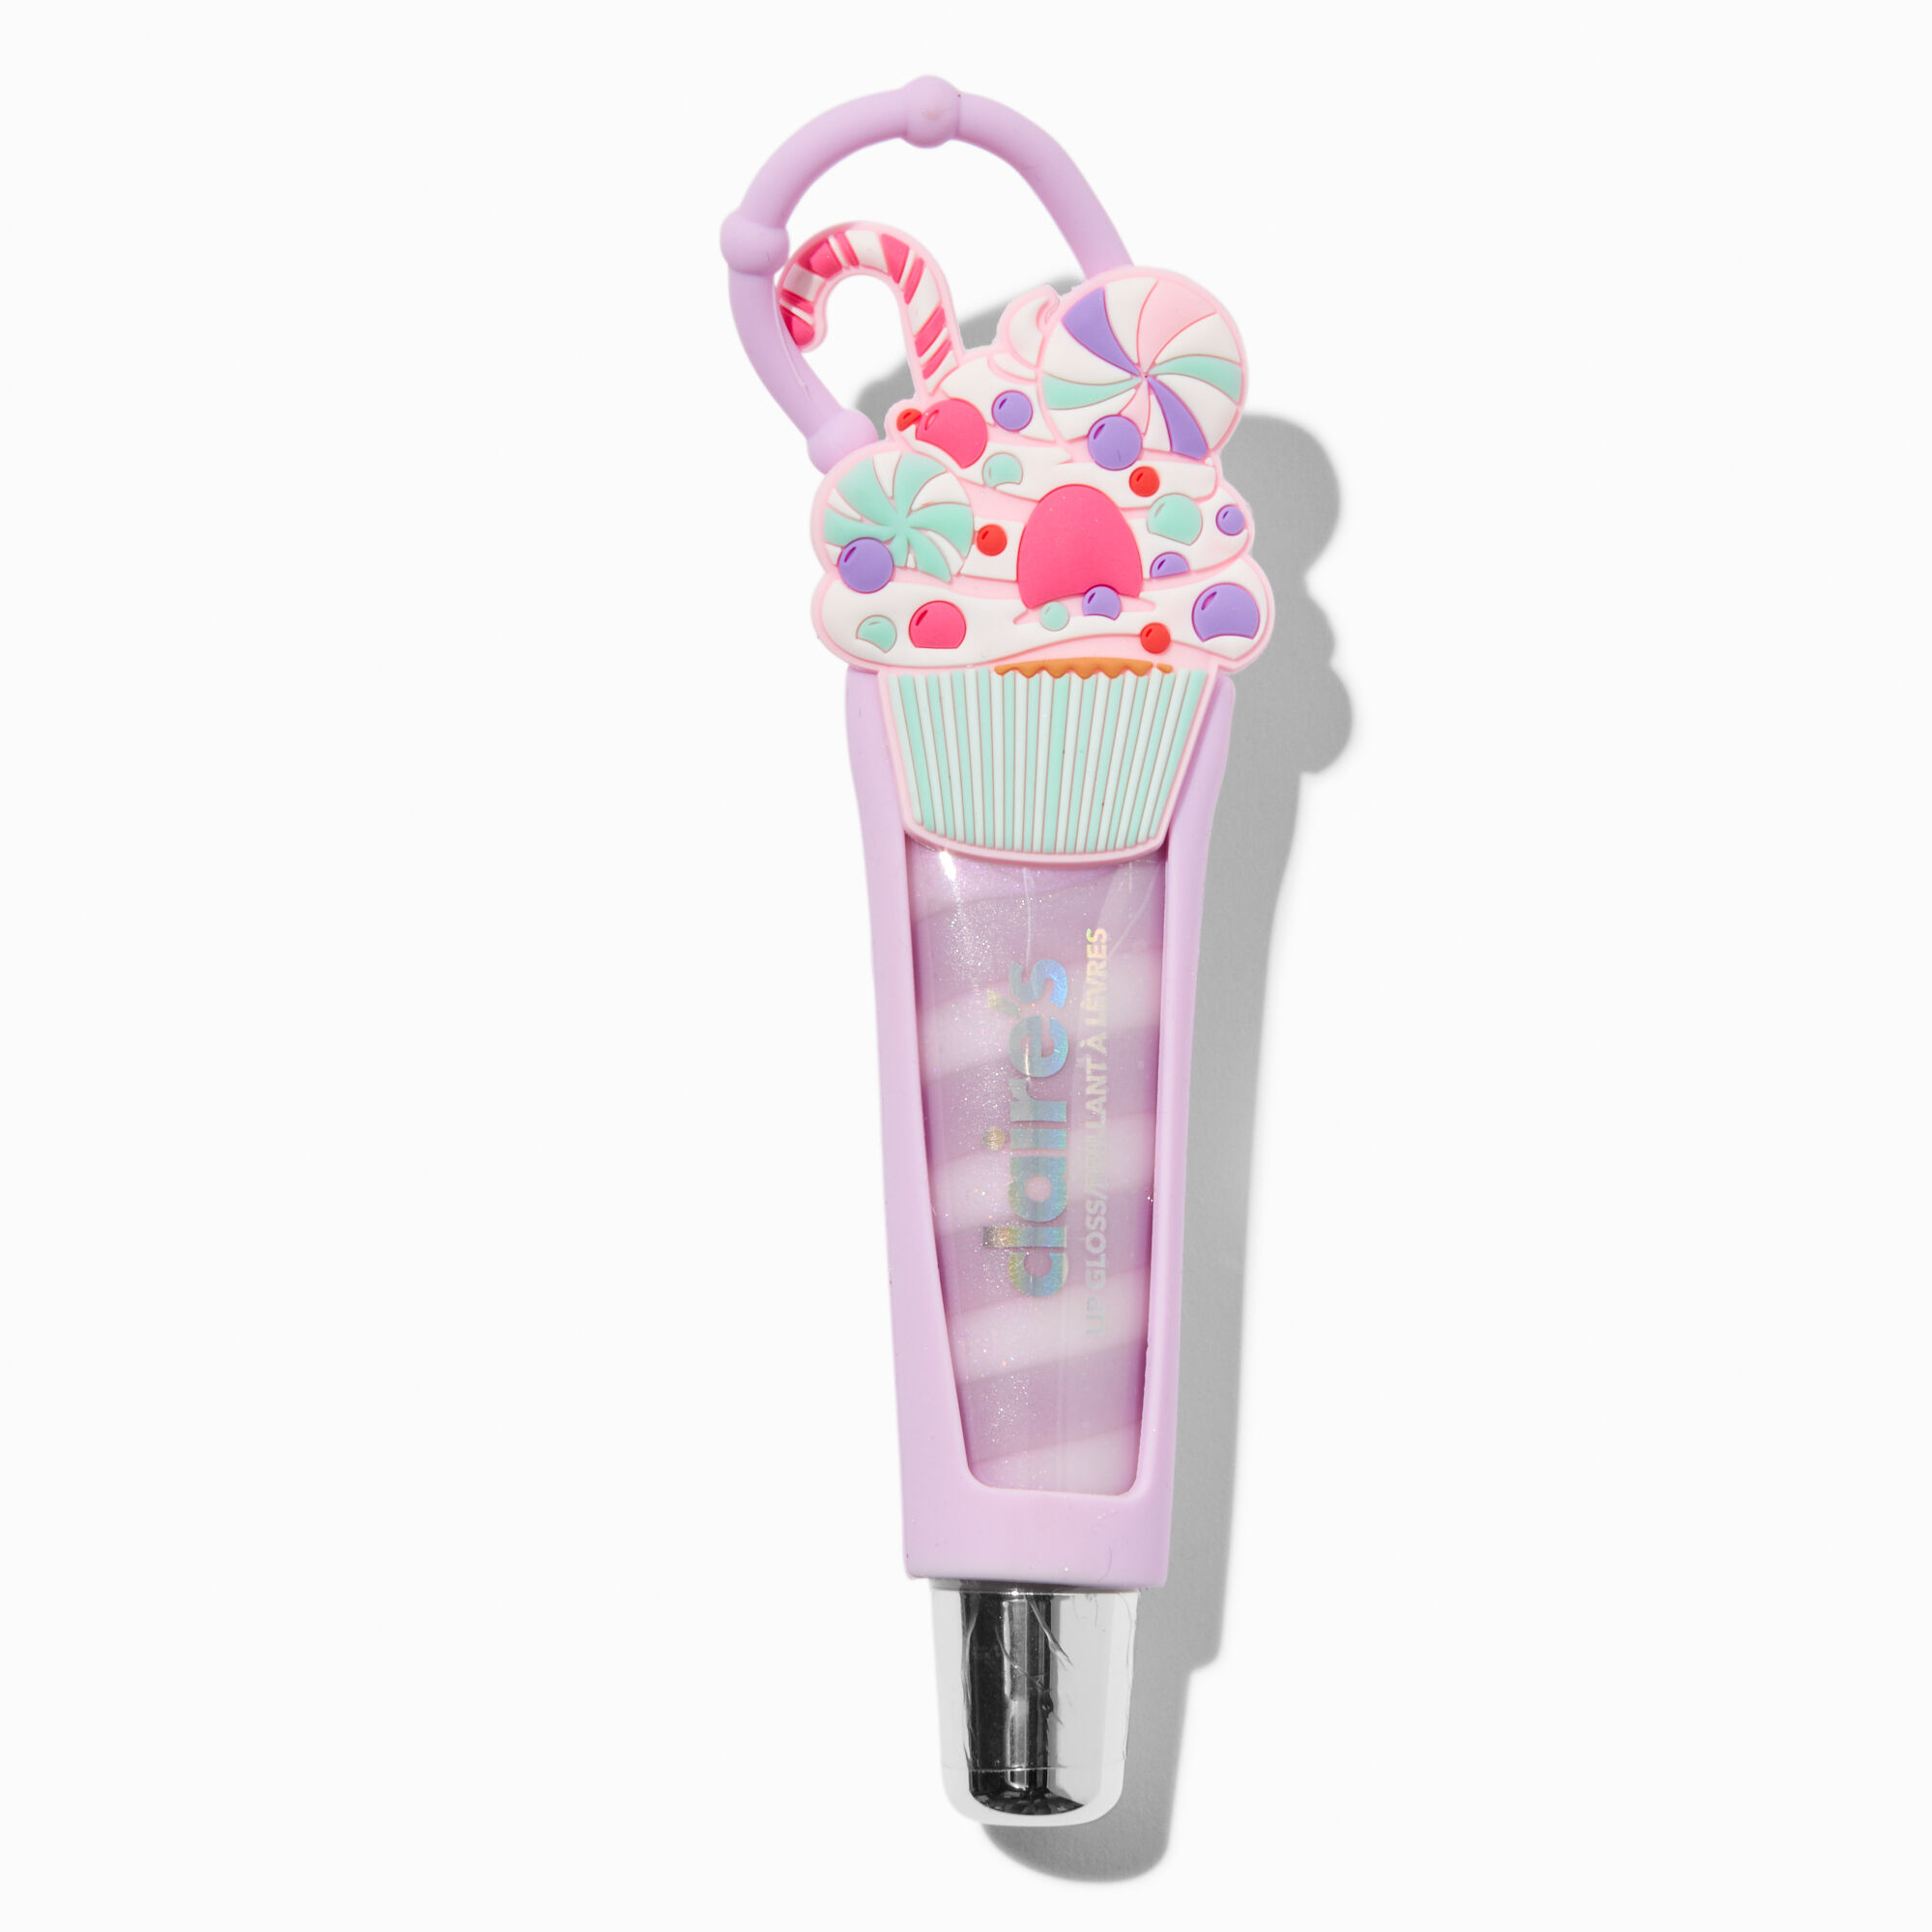 View Claires Candy Cane Cupcake Holder With Swirl Lip Gloss Tube information